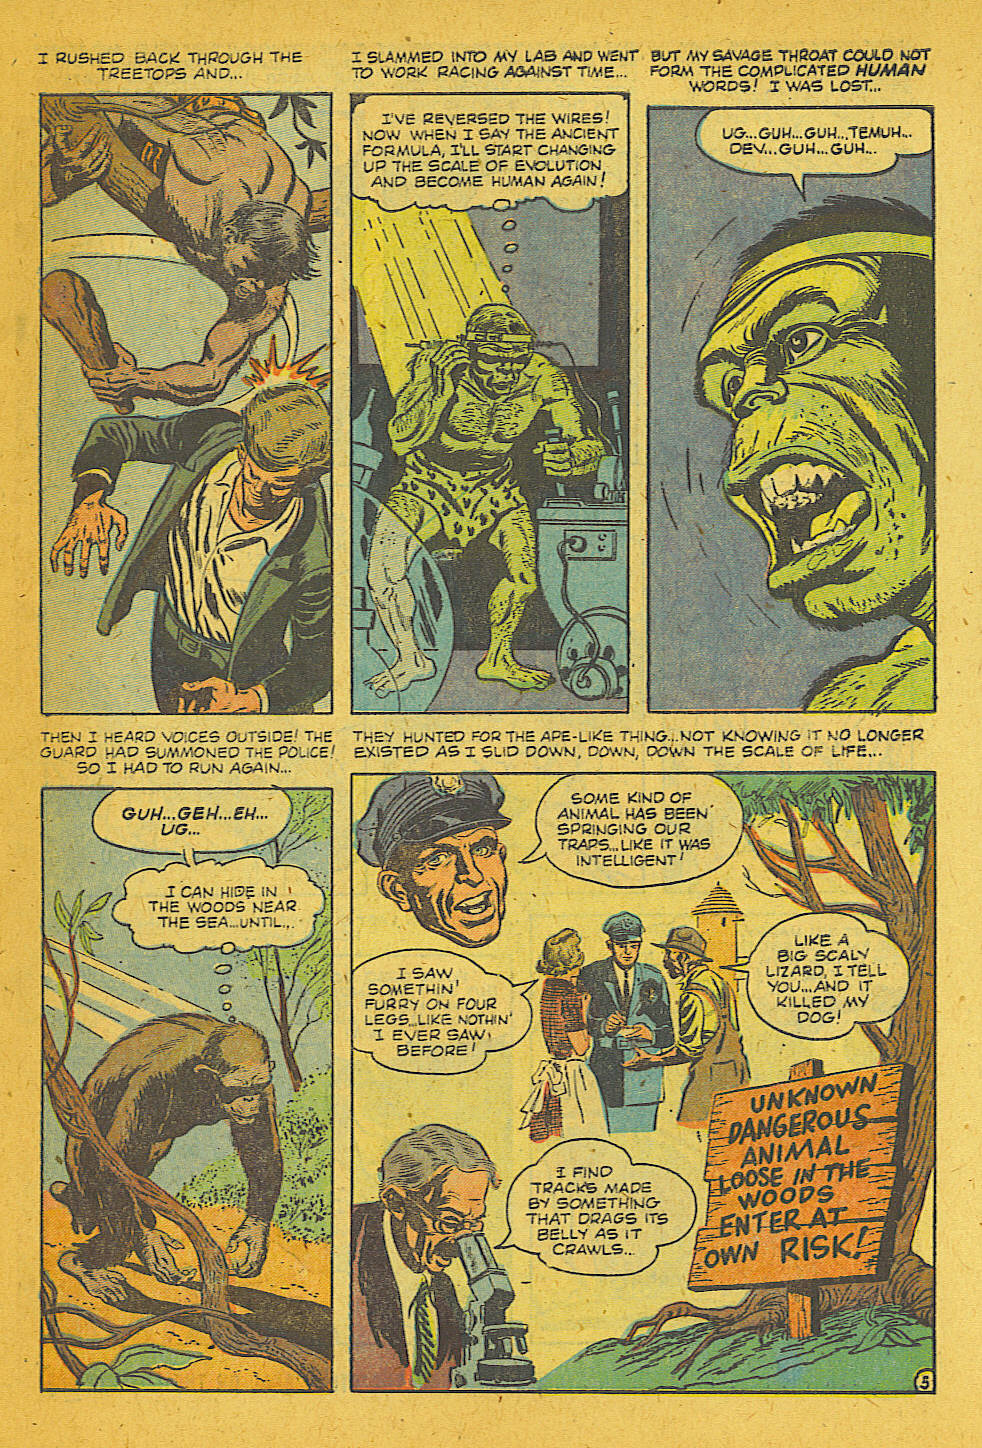 Marvel Tales (1949) 111 Page 5